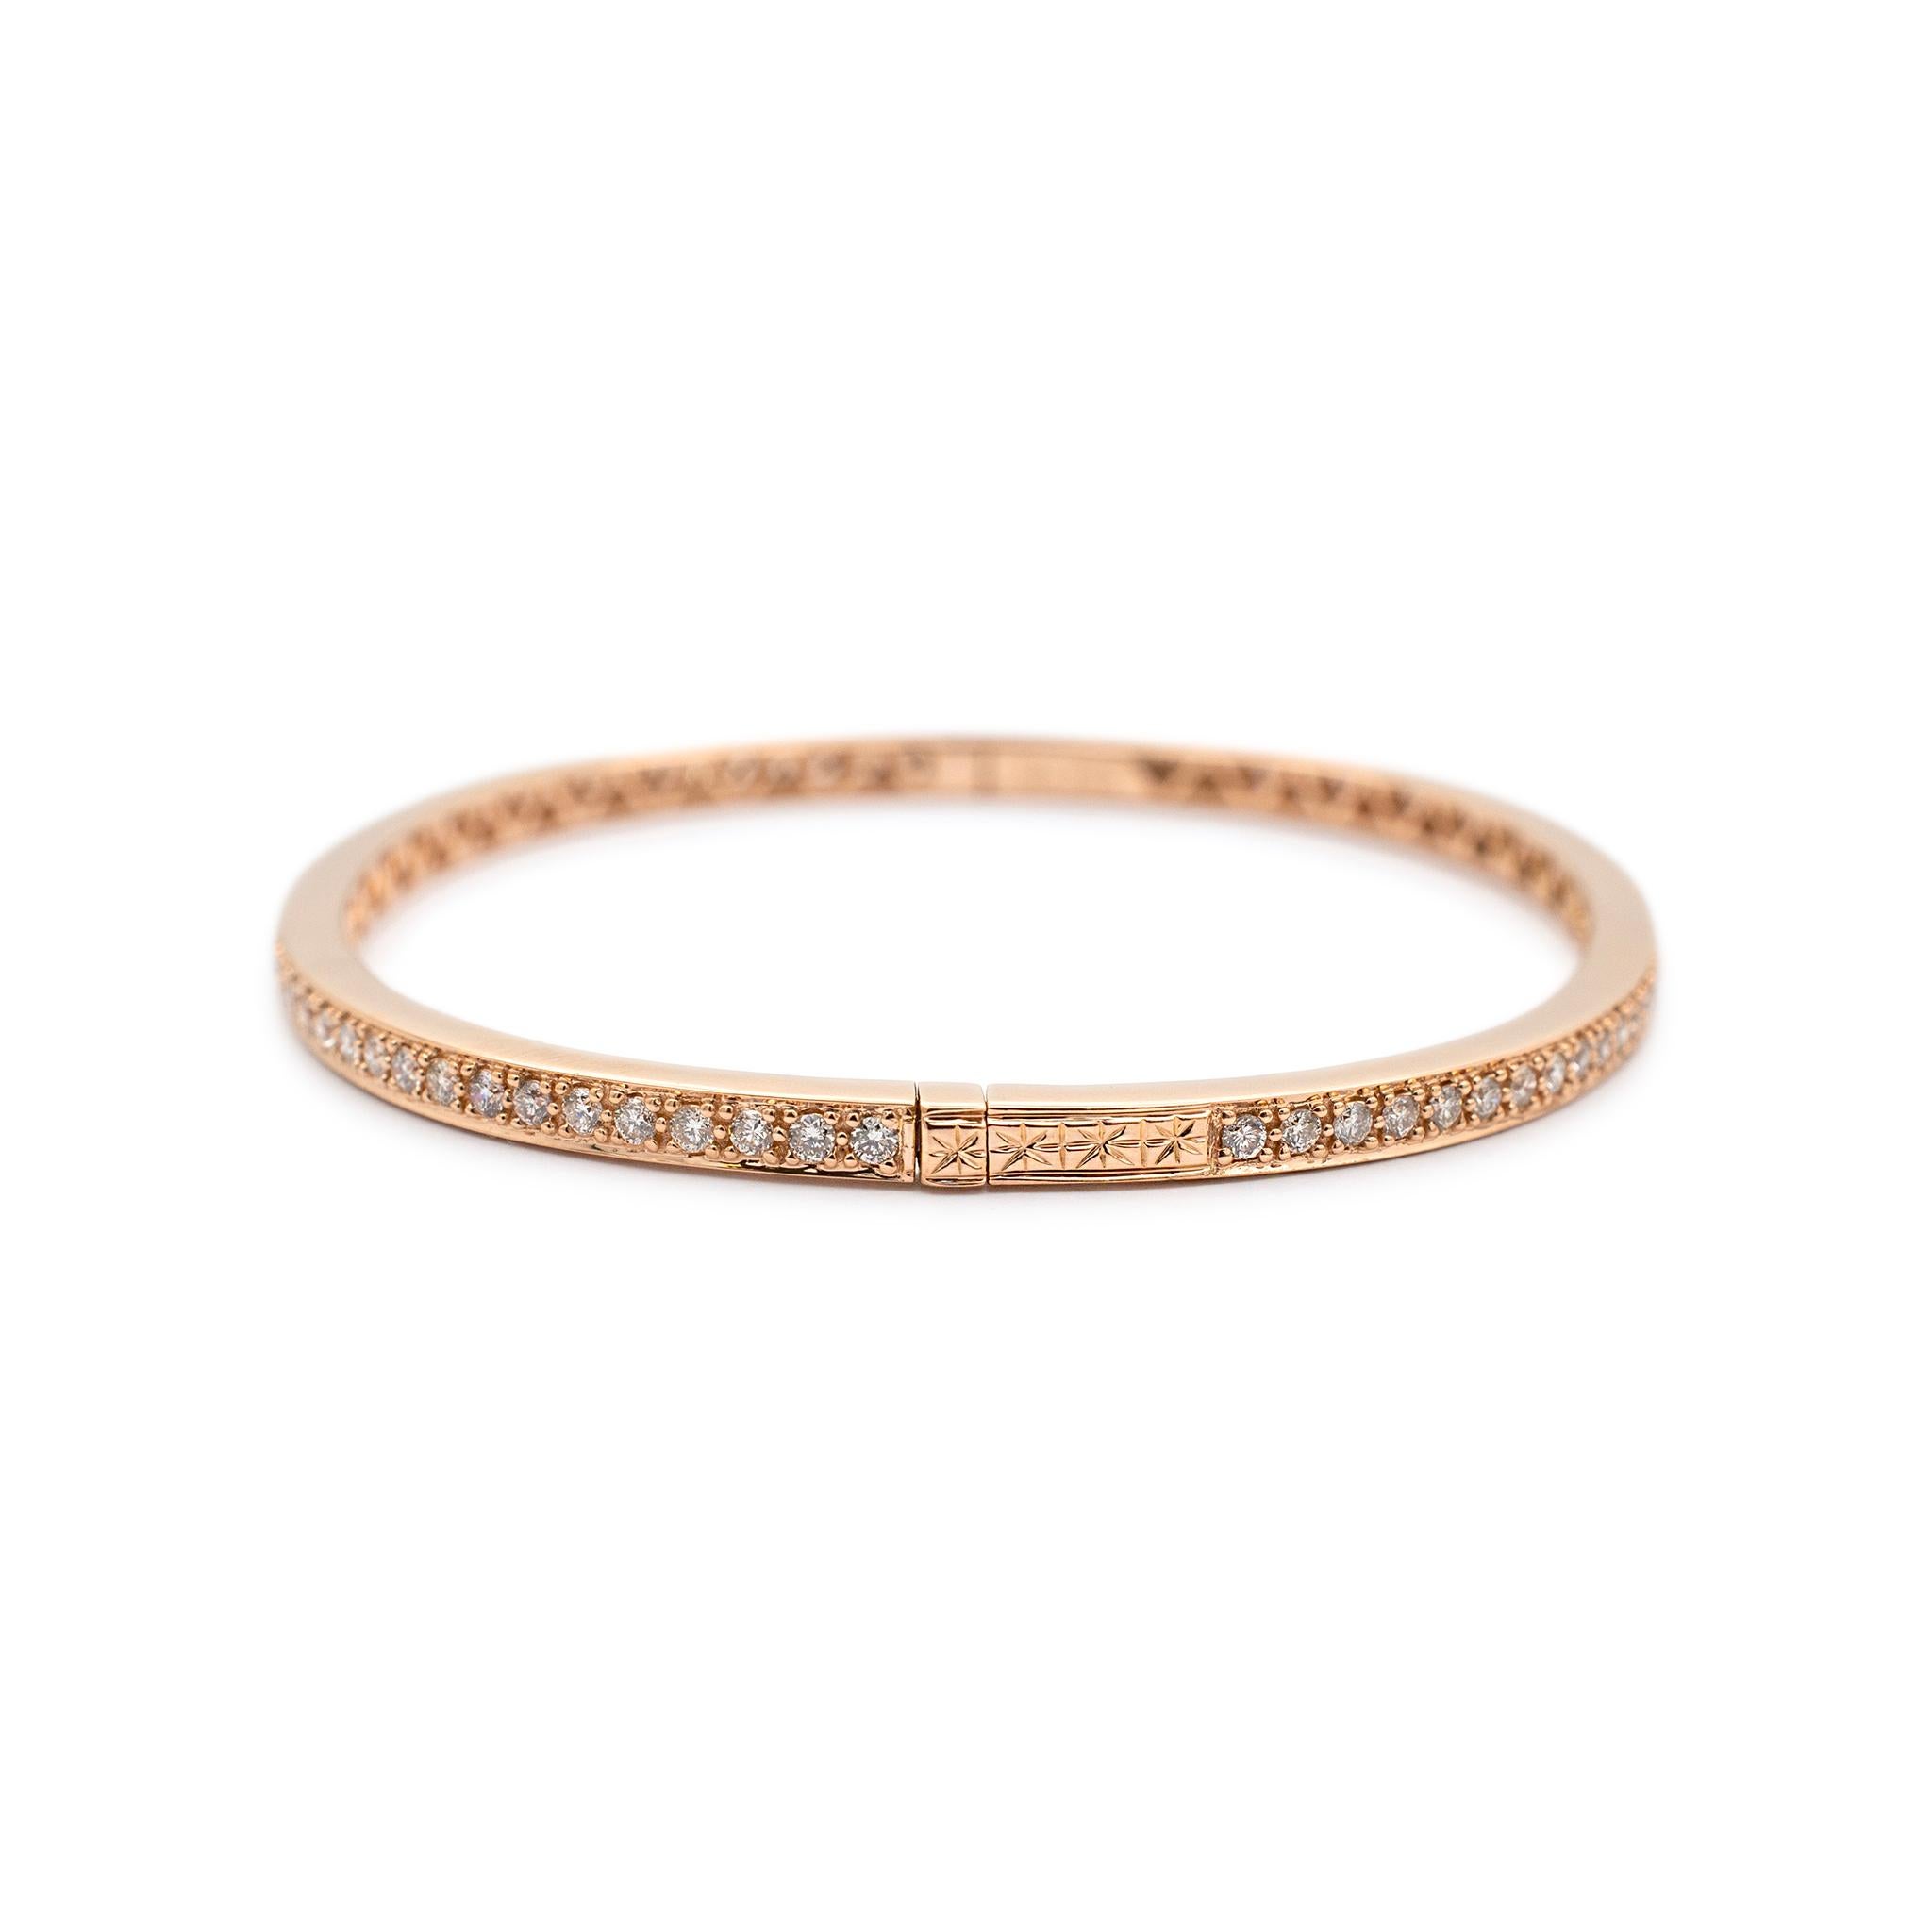 Gender: Ladies

Metal Type: 18K Rose Gold

Length: 6.25 inches

Width: 2.95 mm

Weight:  12.56 grams

18K rose gold diamond bangle bracelet. The metal was tested and determined to be 18K rose gold. Engraved with 